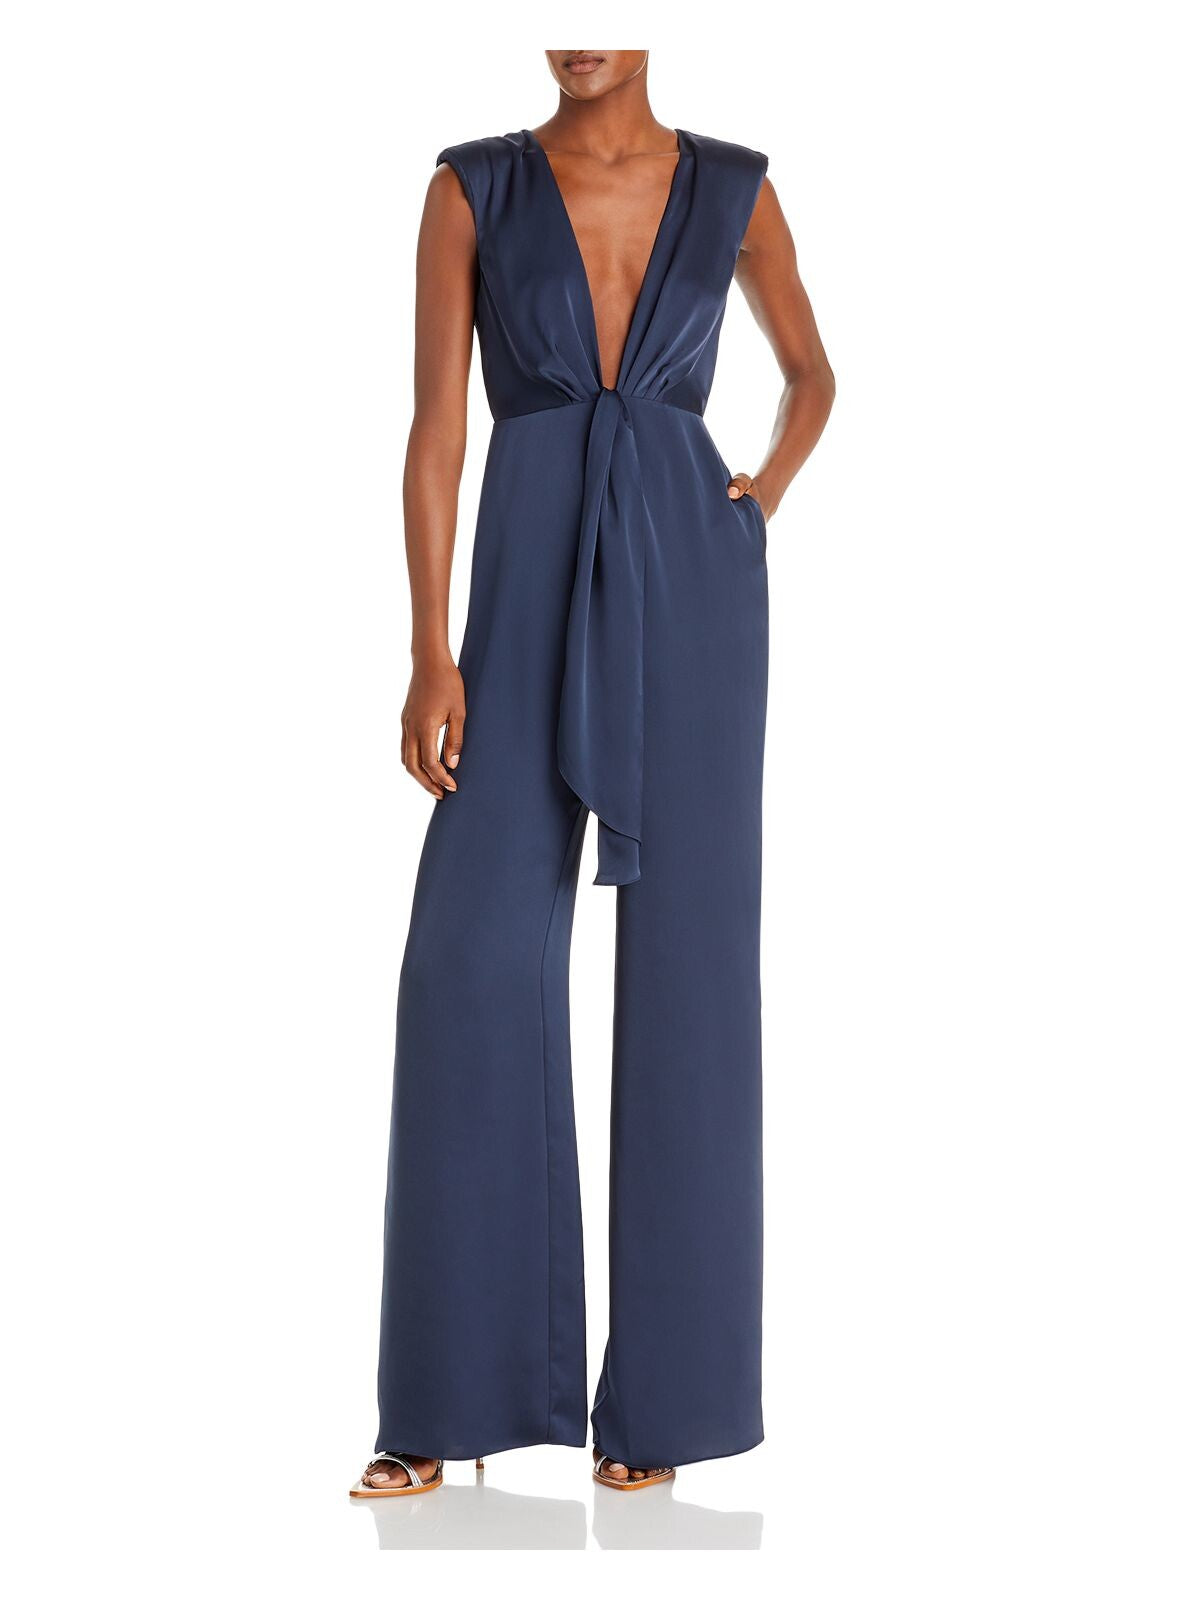 RAMY BROOK Womens Navy Zippered Pocketed Plunging Shoulder Pads Sleeveless V Neck Evening Wide Leg Jumpsuit 0